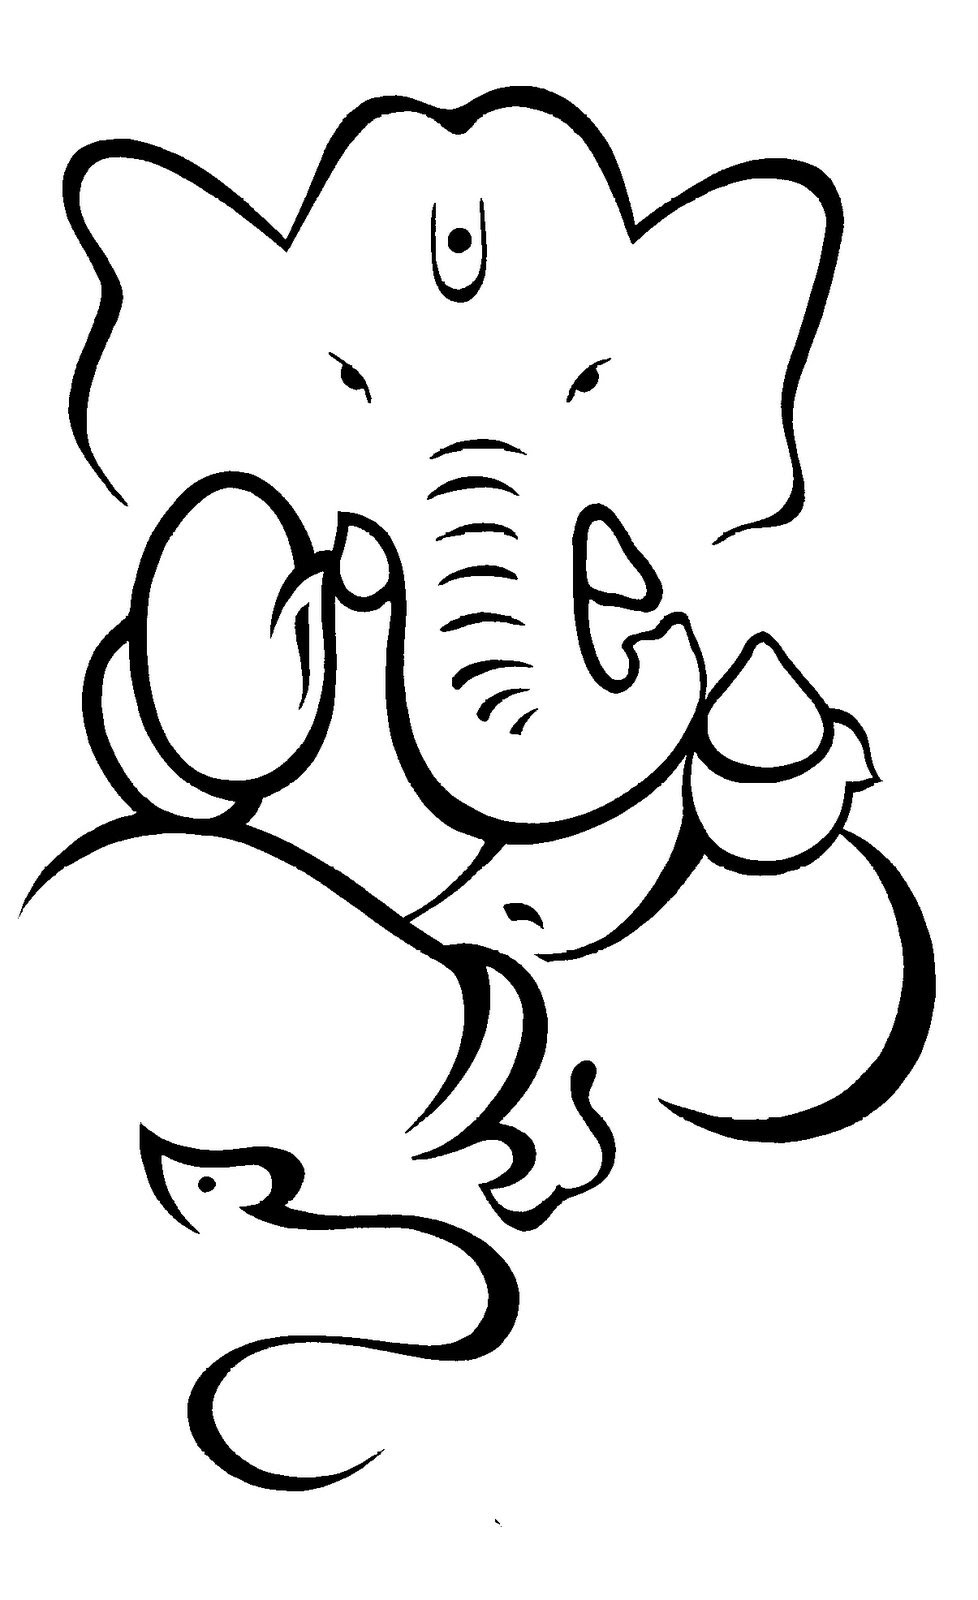 How to Draw Lord Ganesha - YouTube